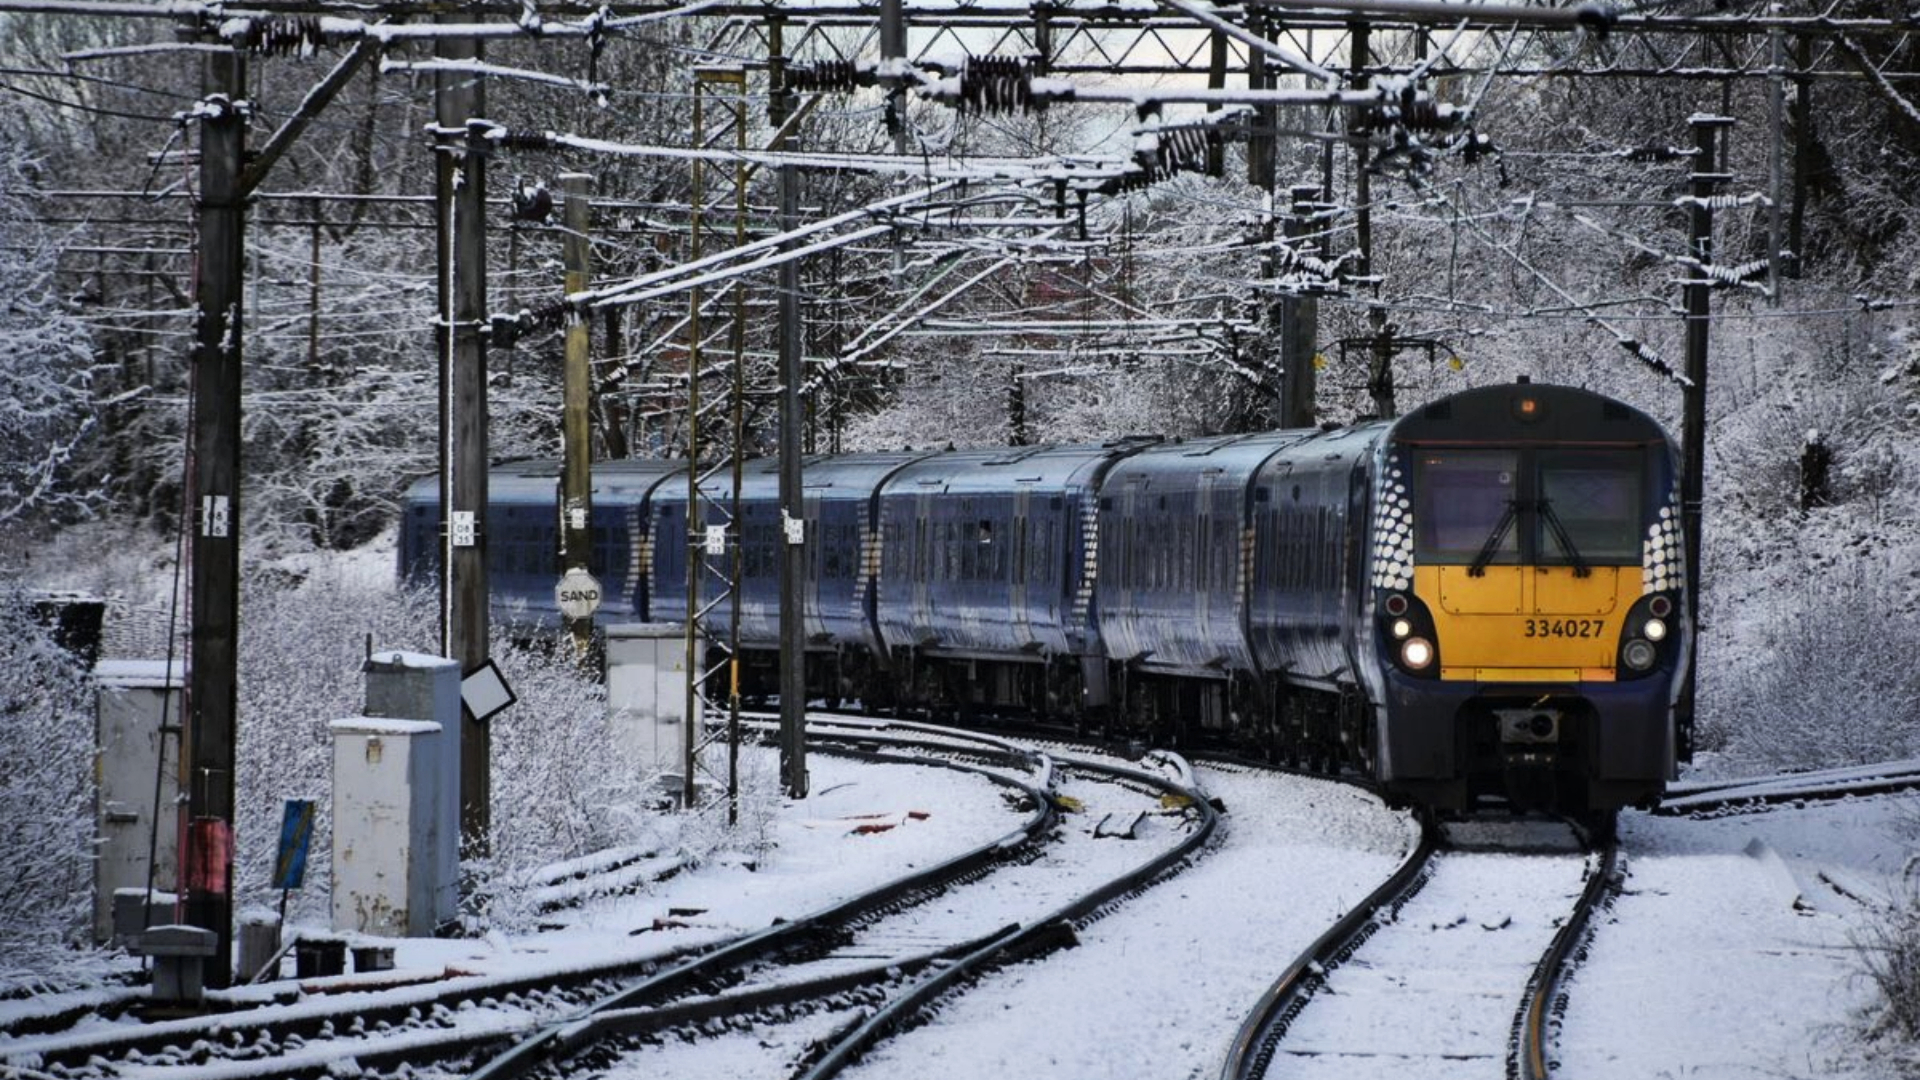 Rail services have been disrupted due to freezing conditions